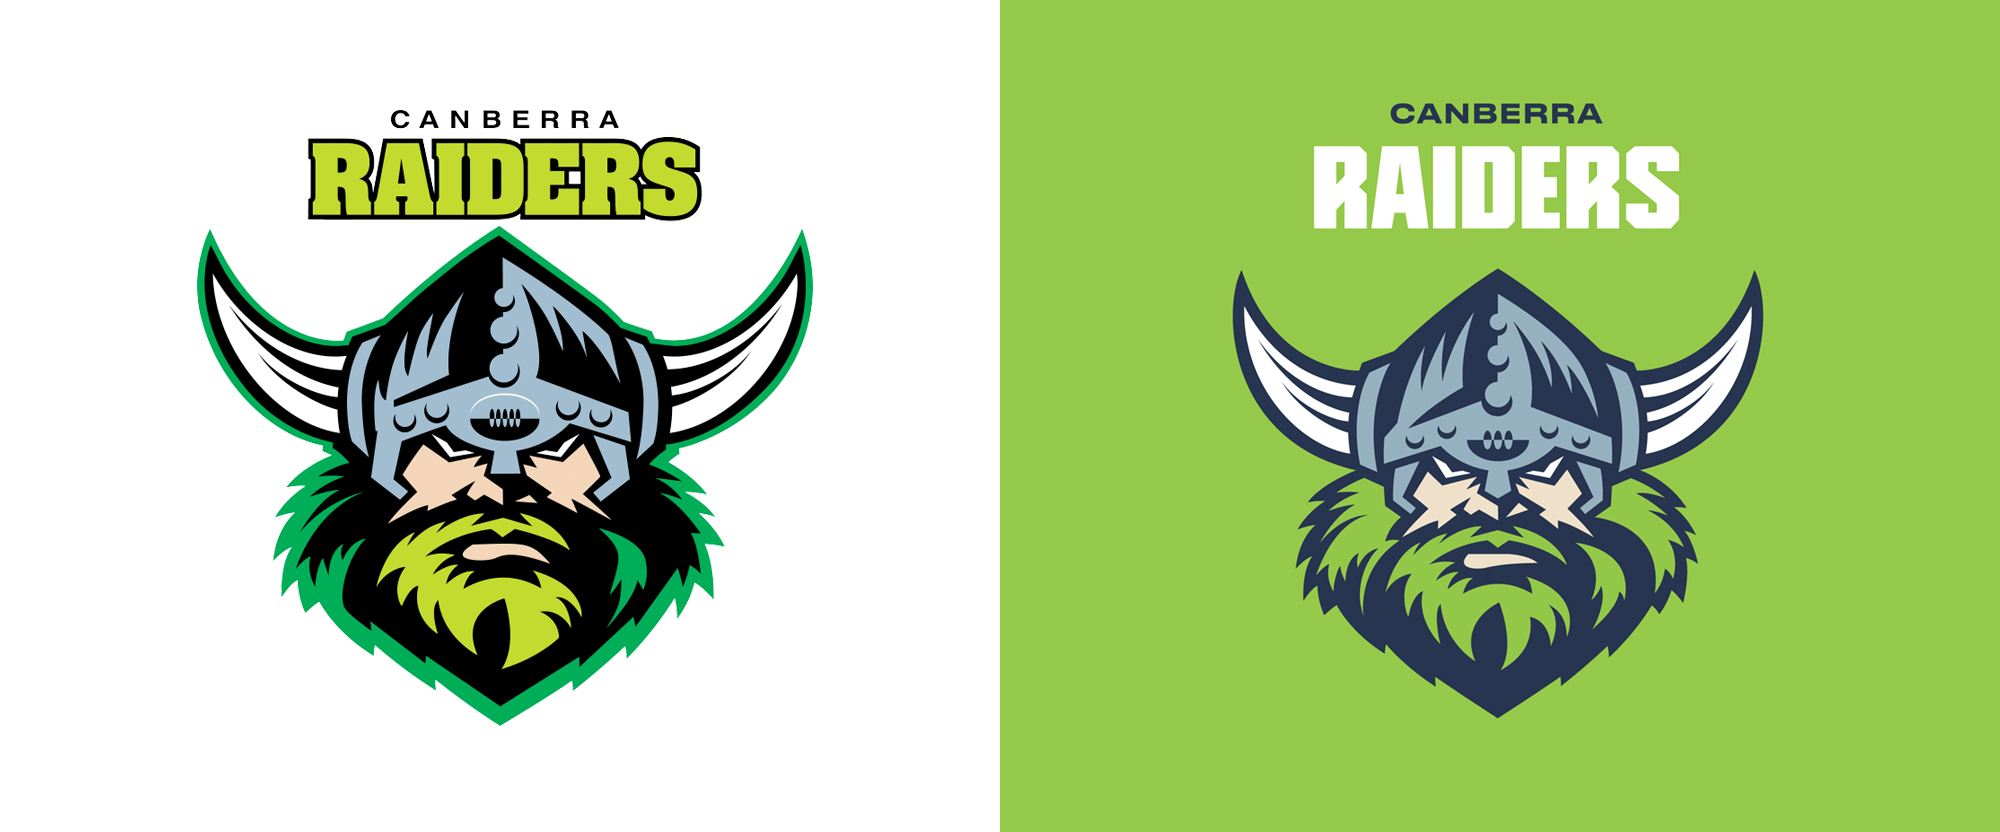 New Logo and Identity for Canberra Raiders by Inklab